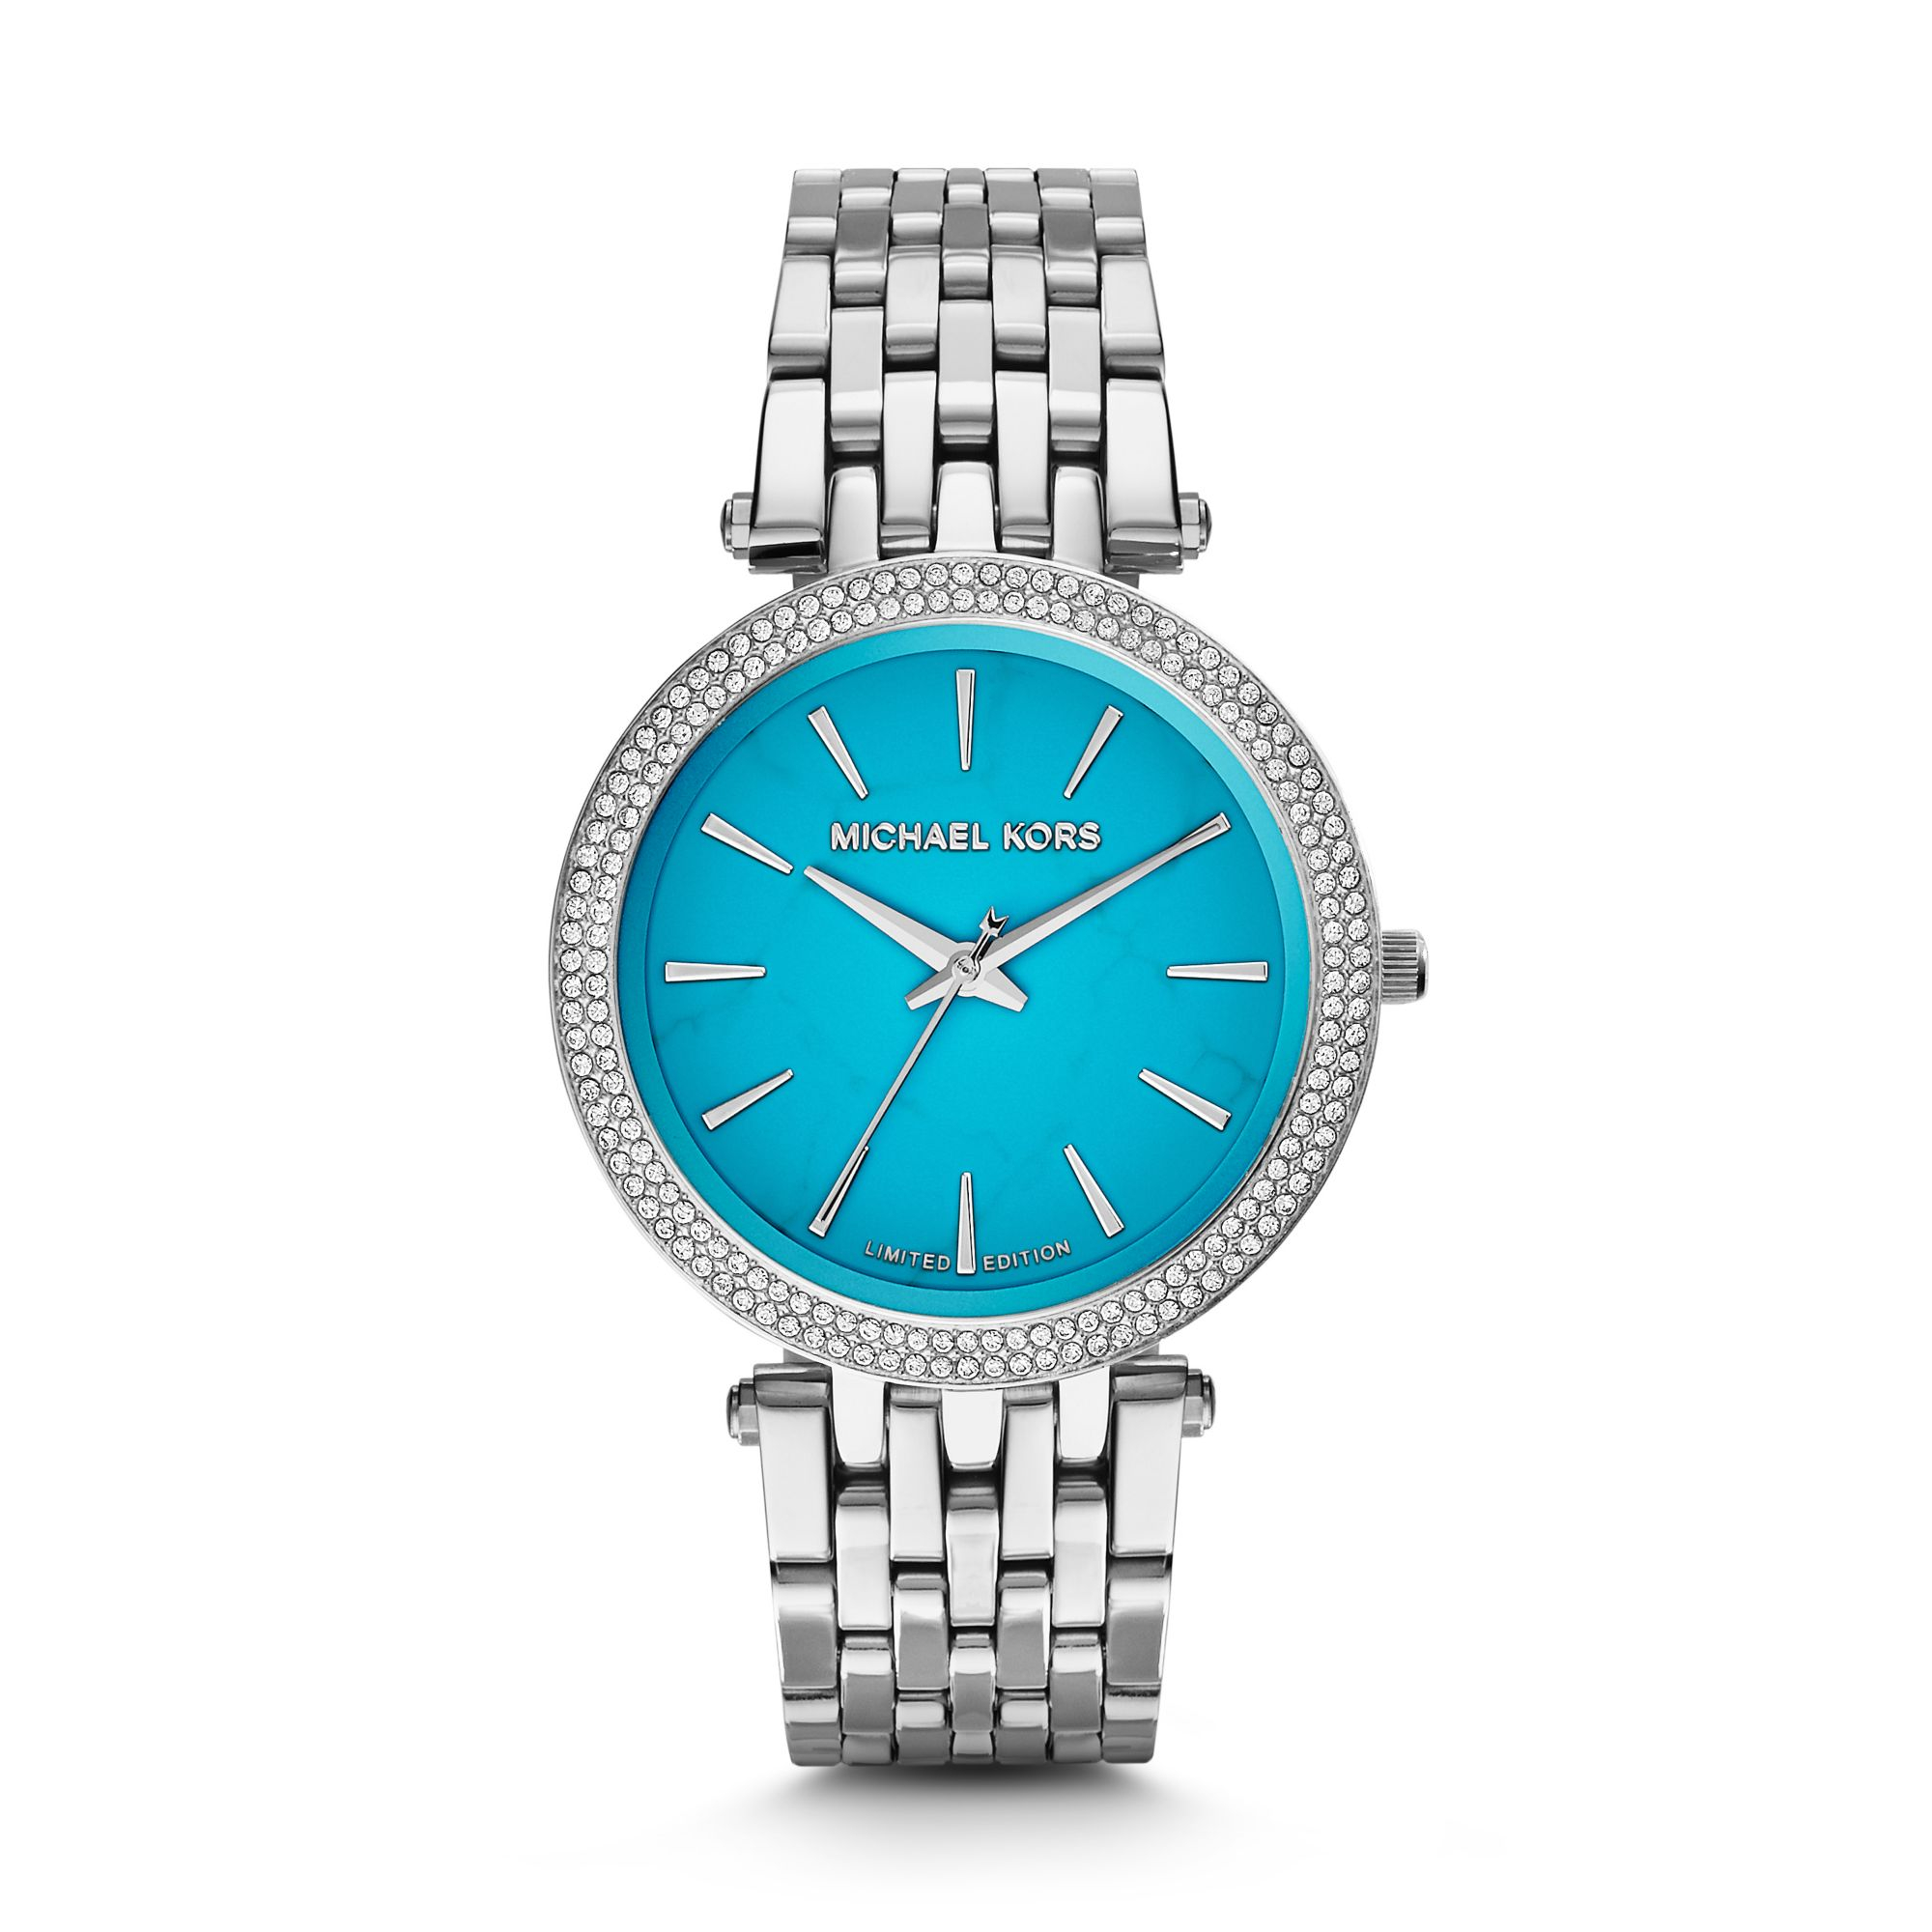 Michael Kors Darci Pave Silver-tone Watch in Blue - Lyst